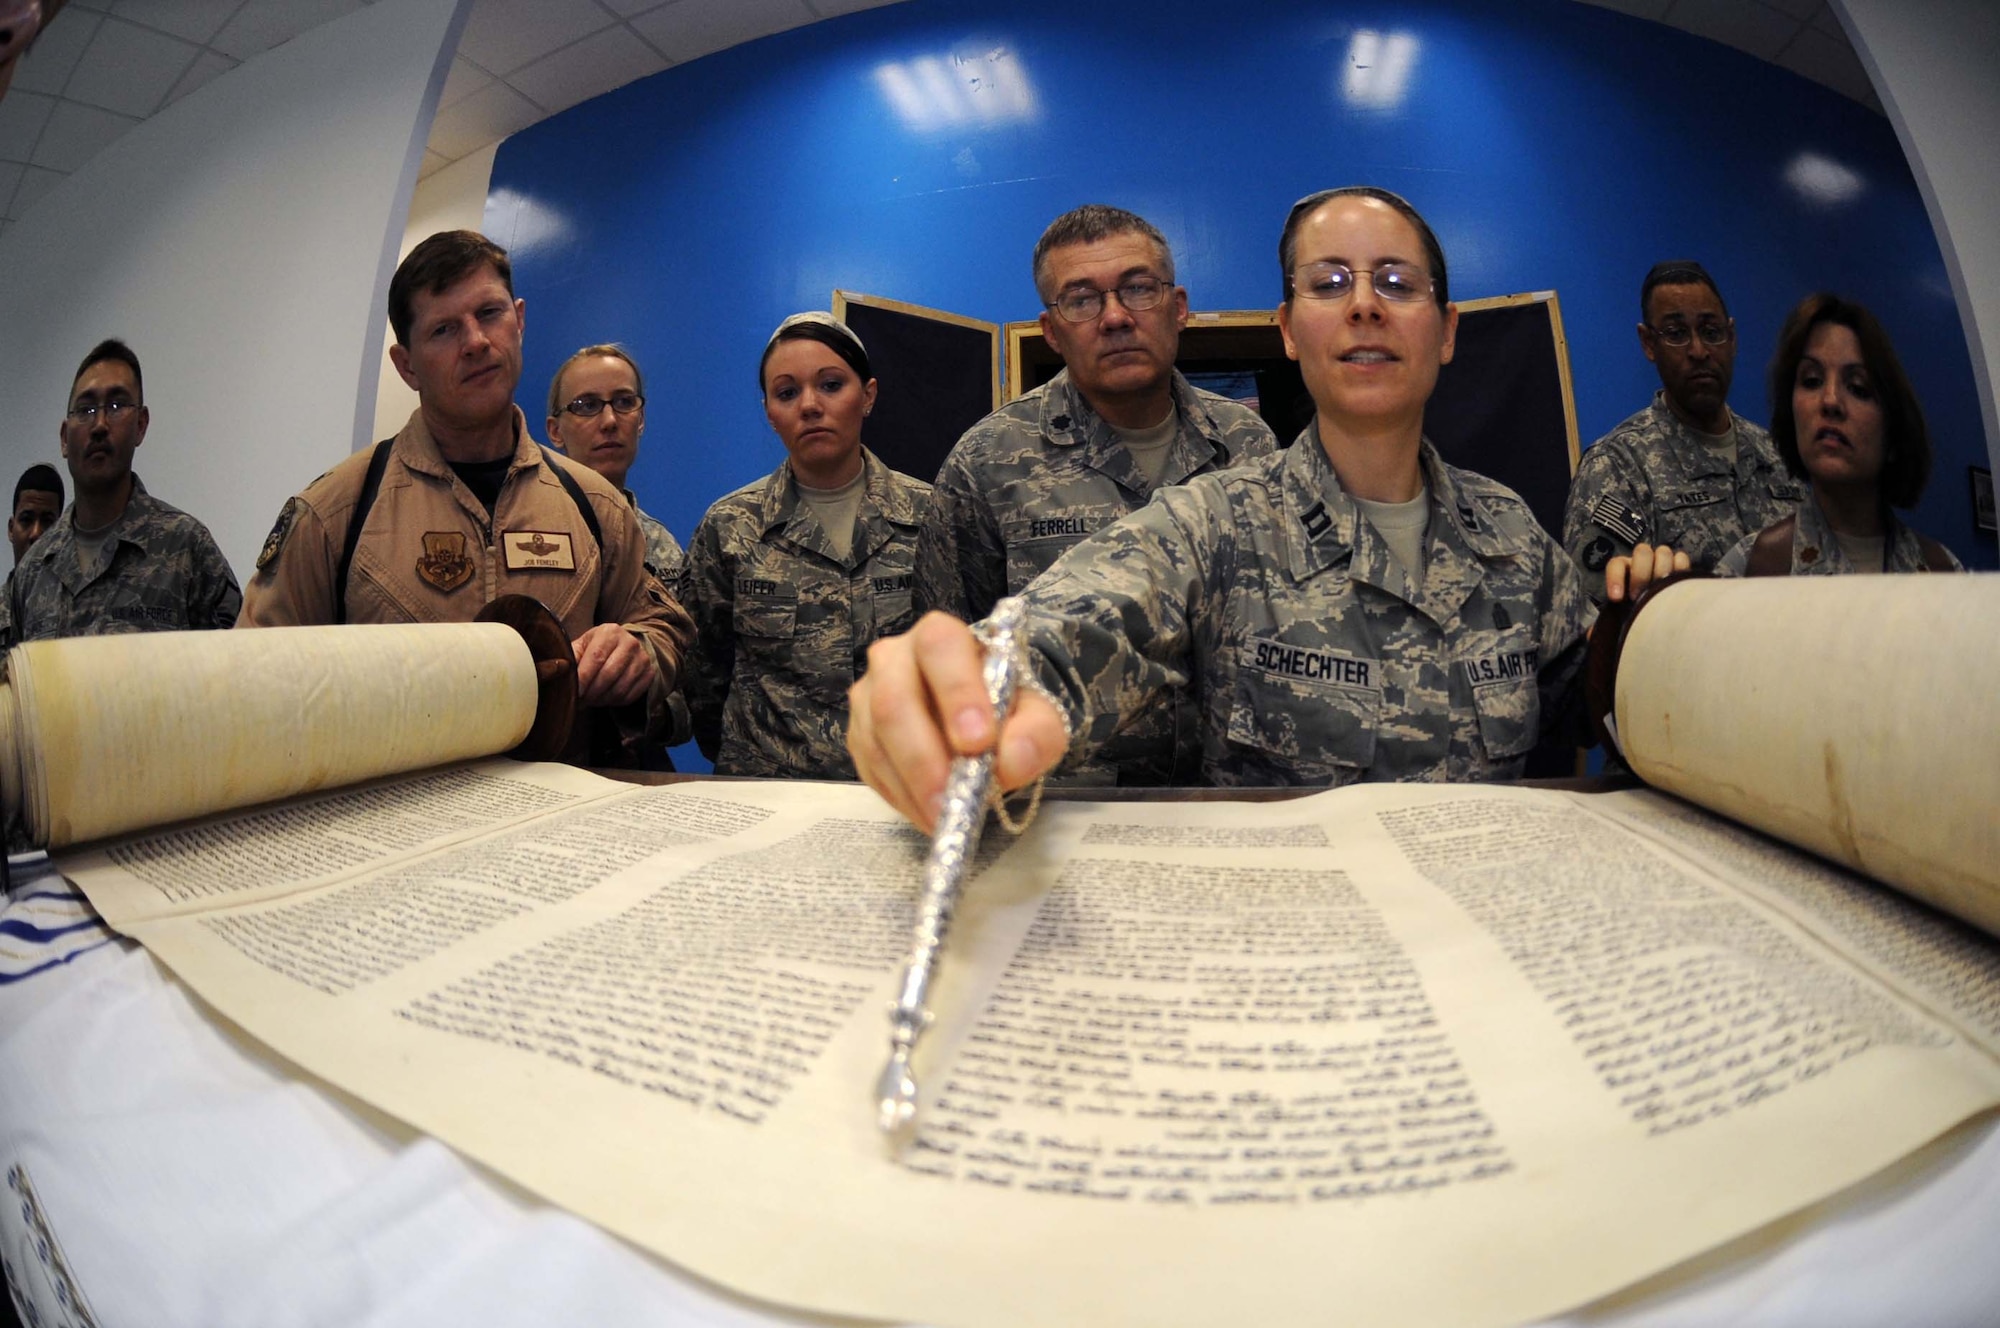 JOINT BASE BALAD, Iraq -- Chaplain (Capt.) Sarah Schechter, 332nd Air Expeditionary Wing rabbi, describes the newly arrived Jewish Torah following a Torah dedication ceremony at Gilbert Memorial Chapel here March 21. A Torah is a big parchment leather scroll on which the Five Books of Moses are handwritten in Hebrew. For thousands of years, this is how Jews have maintained their law, teachings, religion and society. (U.S. Air Force photo/Senior Airman Elizabeth Rissmiller)